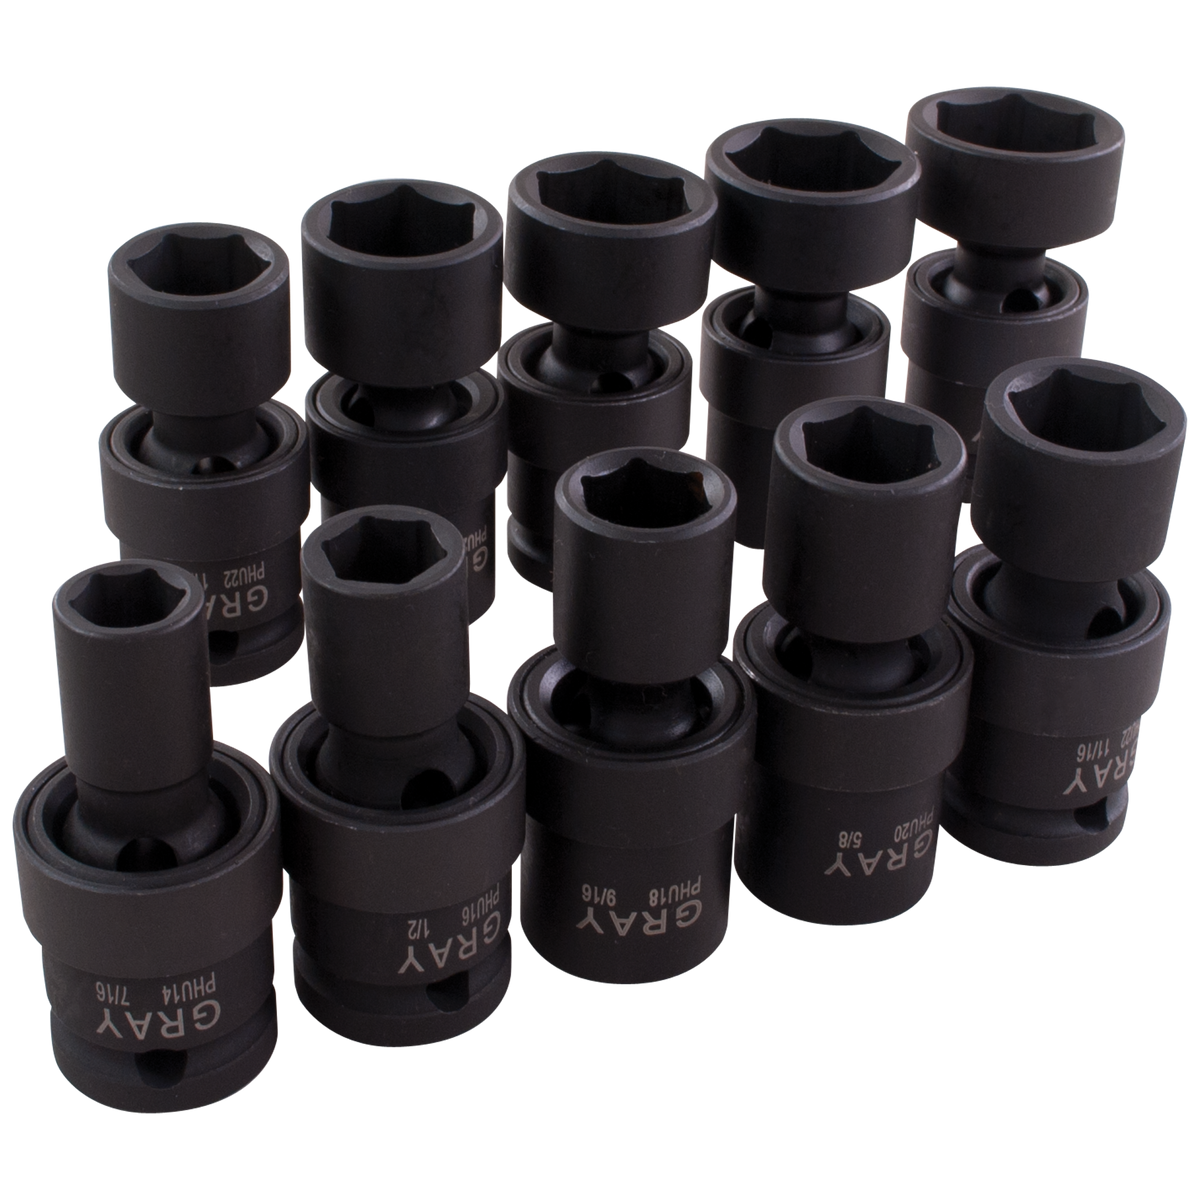 1-2-dr-10-piece-6-point-standard-sae-impact-universal-joint-socket-s